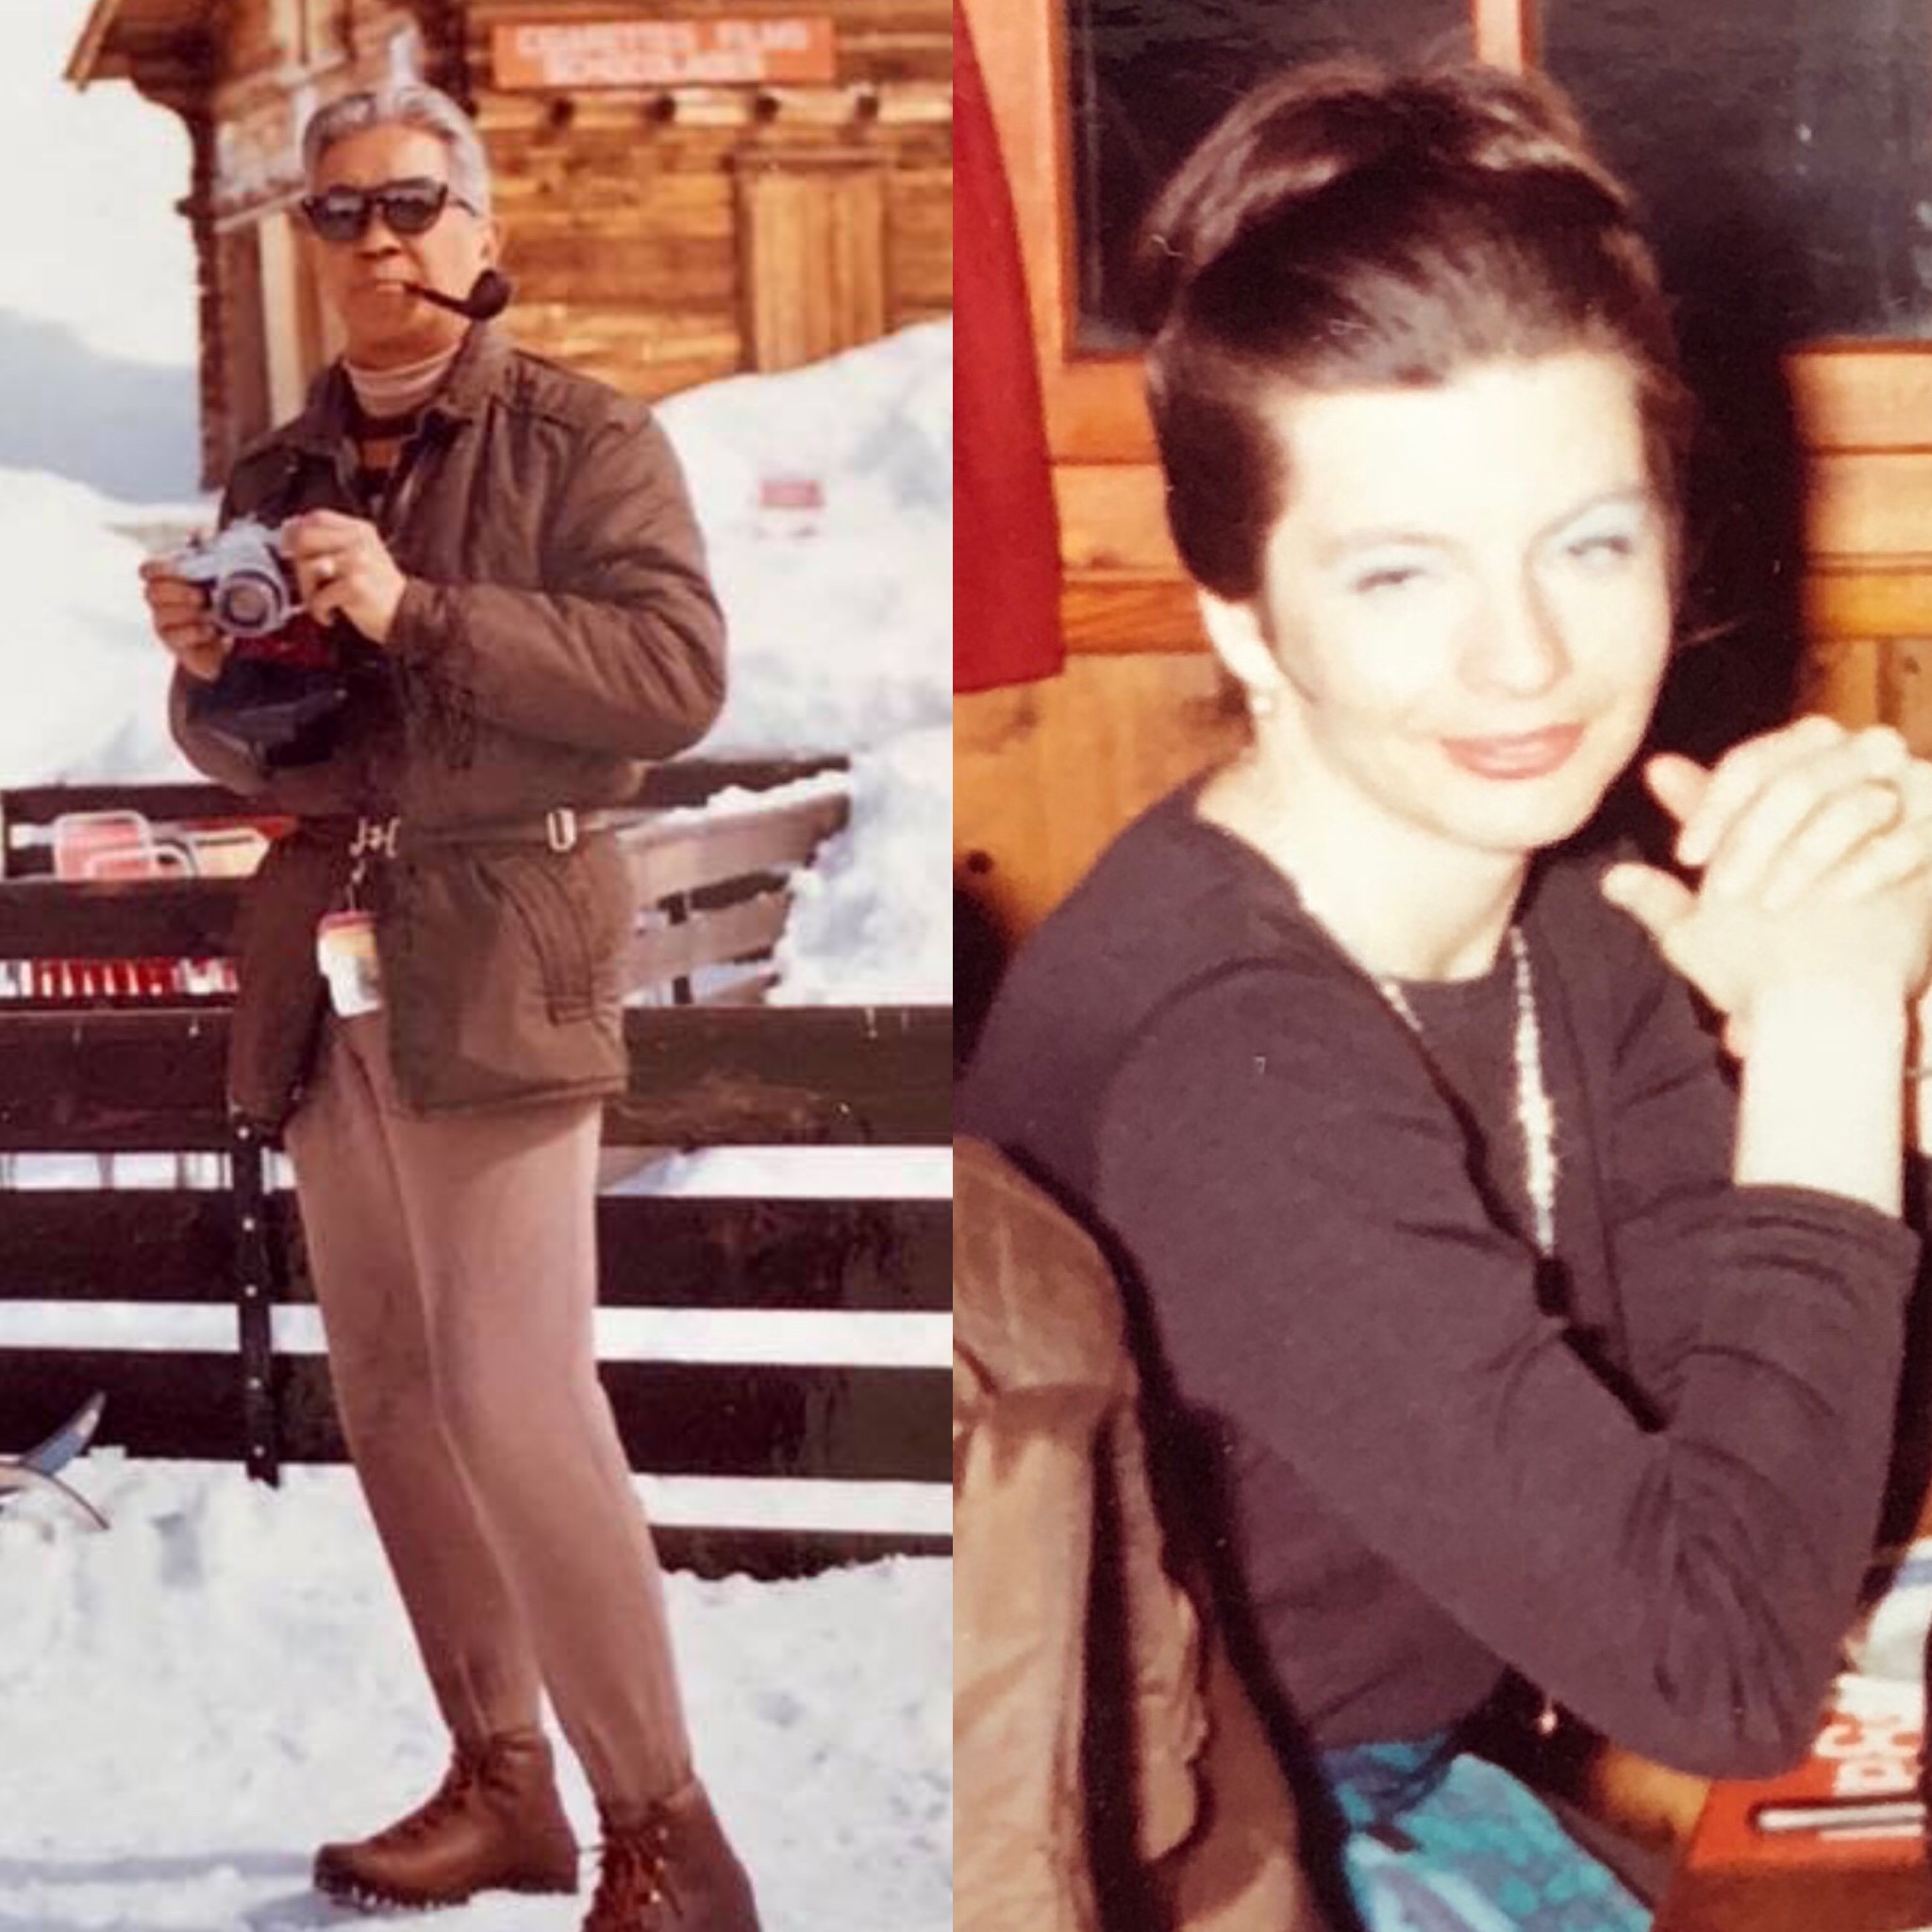 Mom and Dad on their honeymoon in Switzerland and Austria in 1971